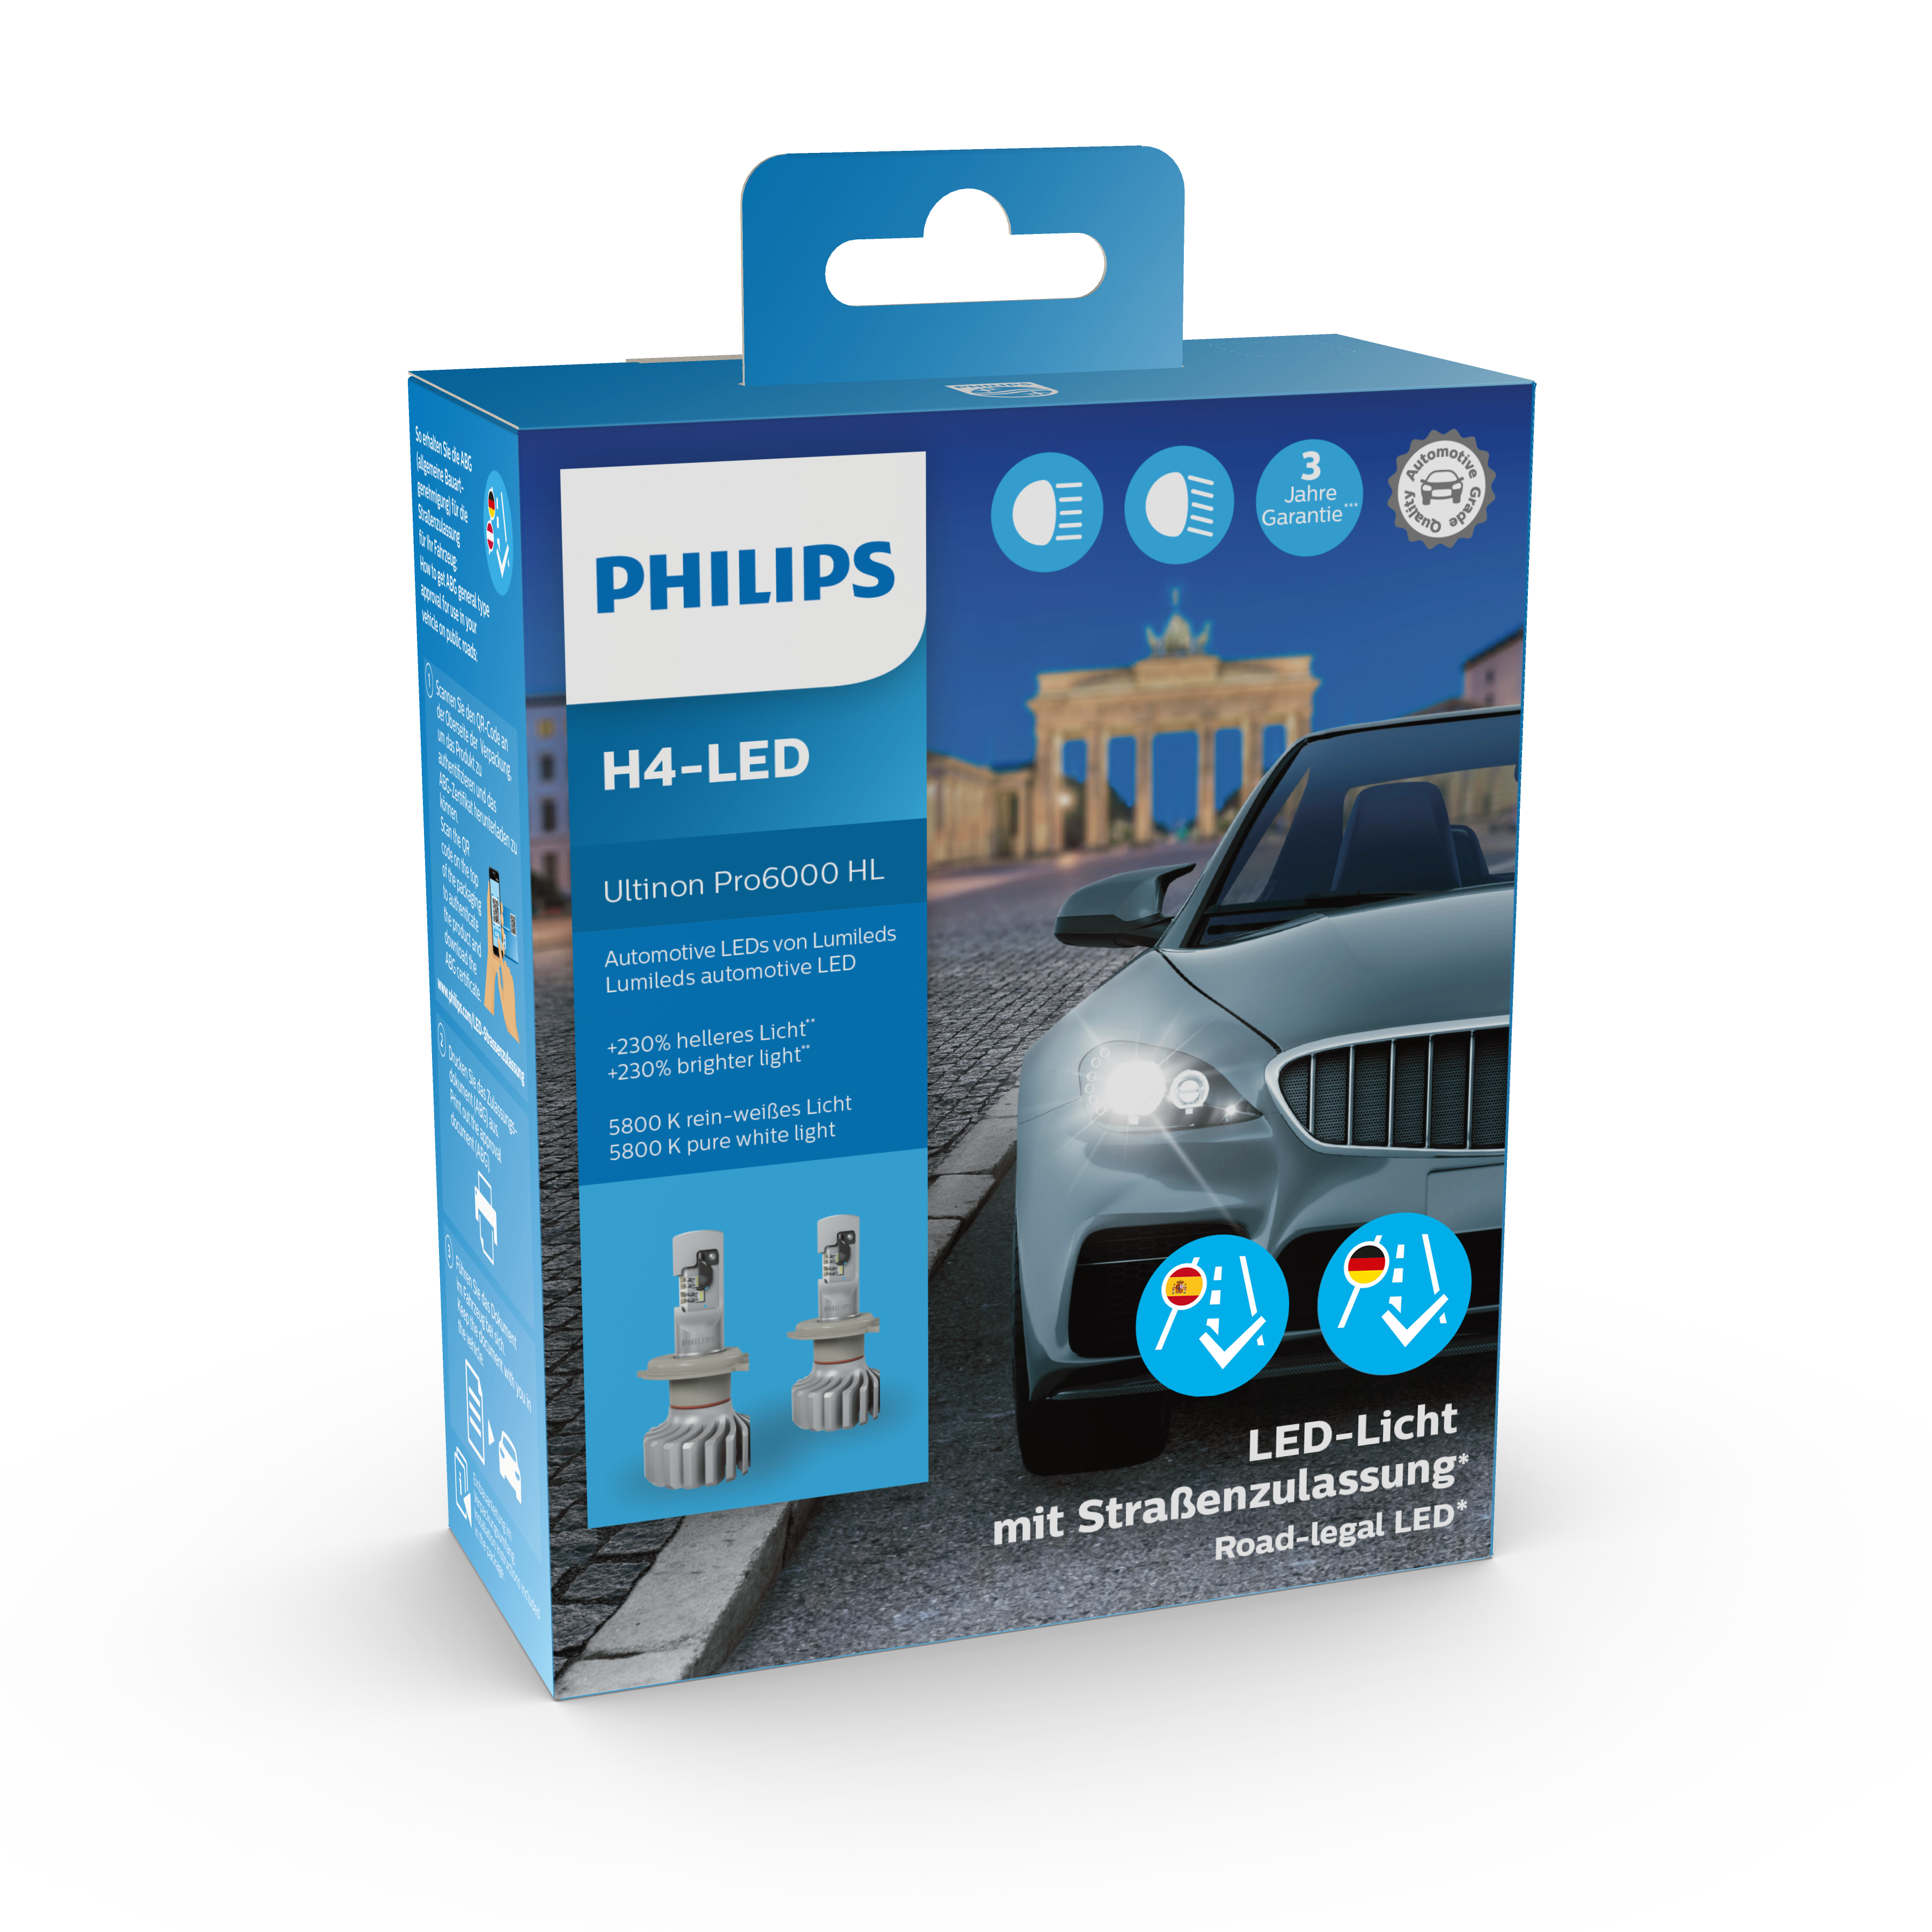 H4-LED Philips UltinonPro 6000 HL package